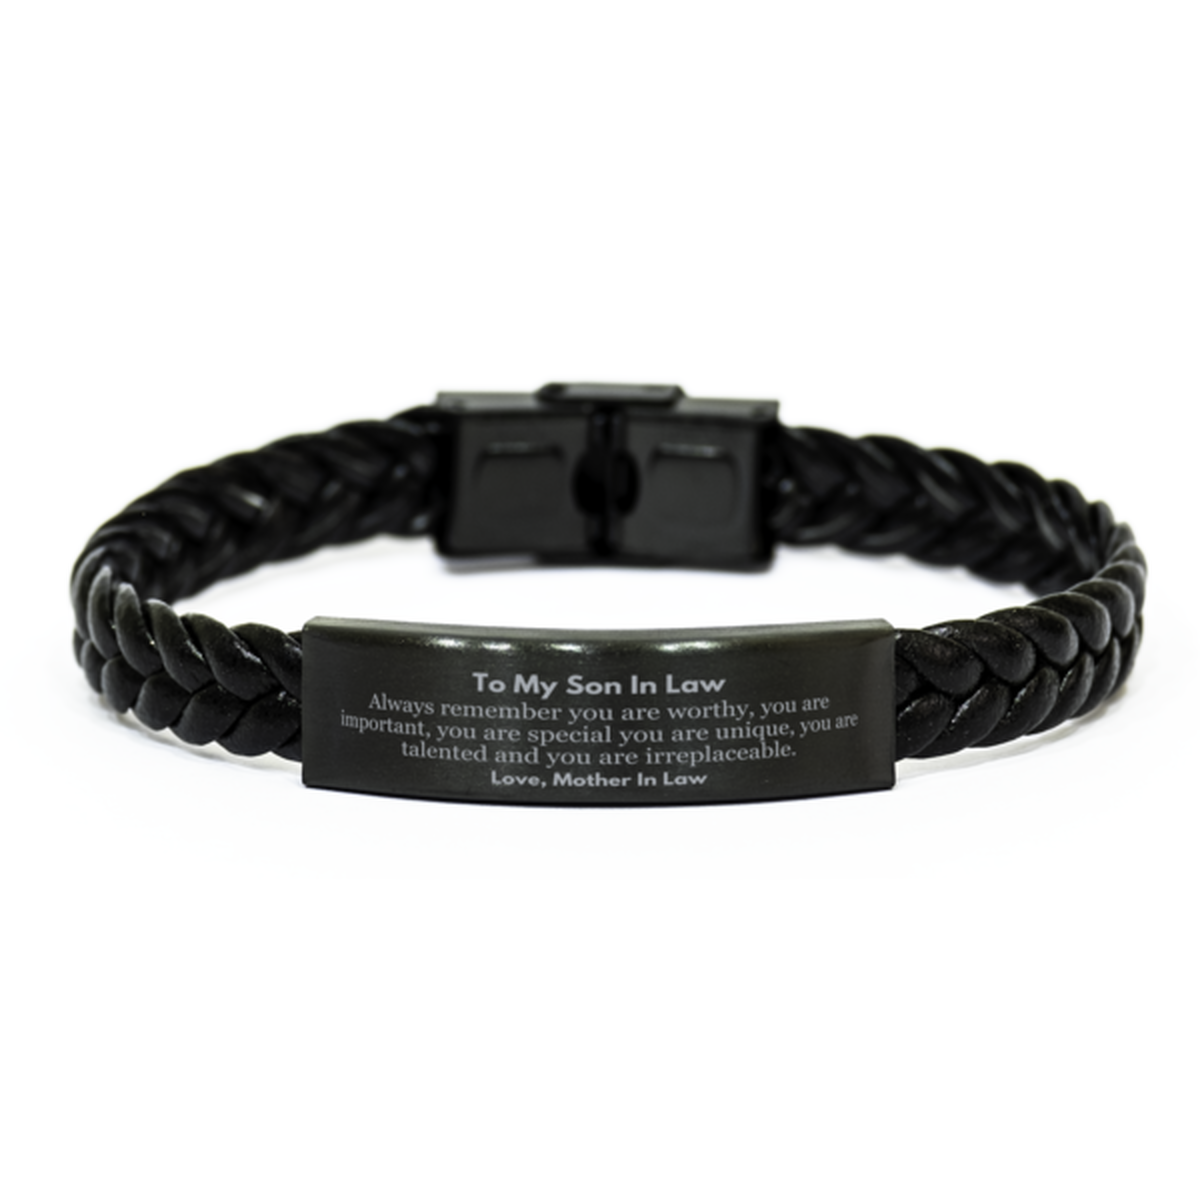 Son In Law Birthday Gifts from Mother In Law, Inspirational Braided Leather Bracelet for Son In Law Christmas Graduation Gifts for Son In Law Always remember you are worthy, you are important. Love, Mother In Law